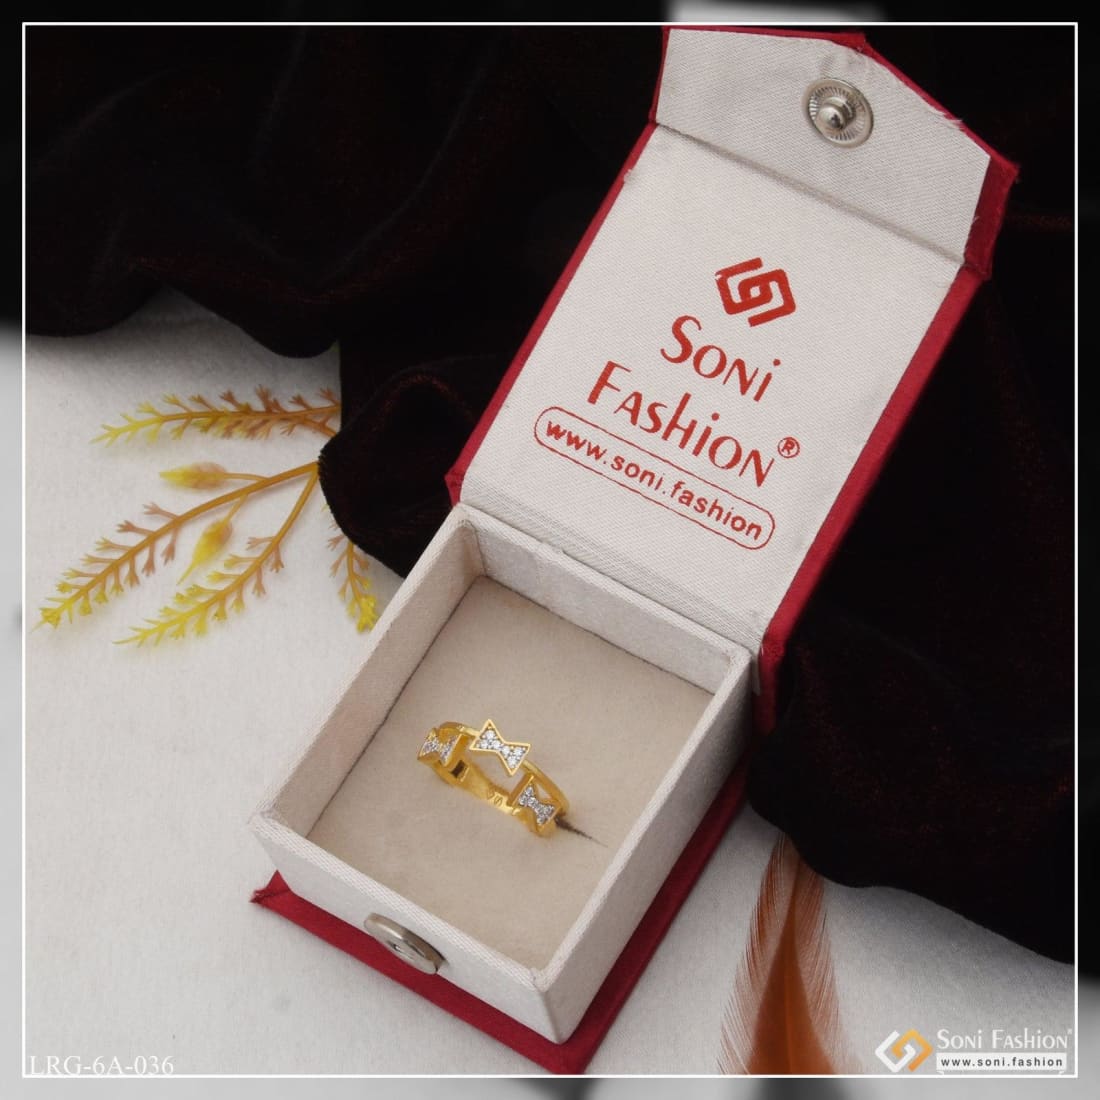 Buy String Gold Ring 22 KT yellow gold (2.45 gm). | Online By Giriraj  Jewellers